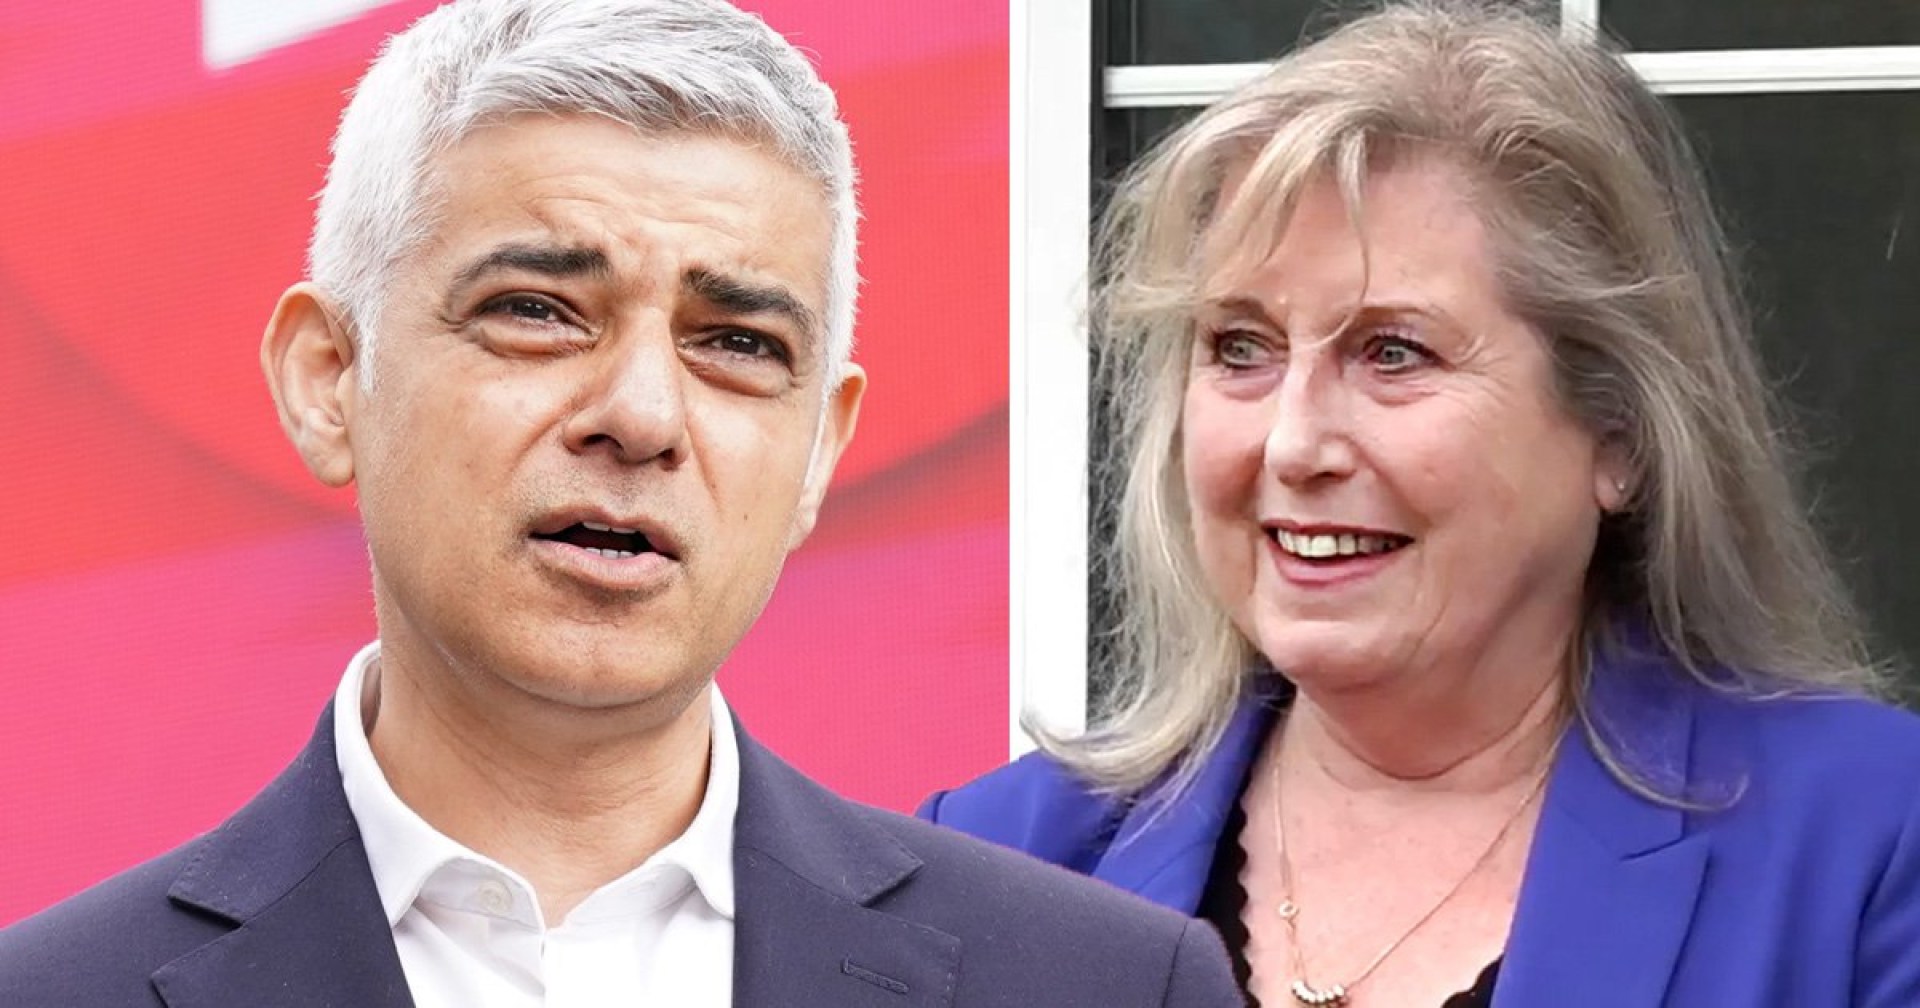 london mayor results due after tories hammered in local elections